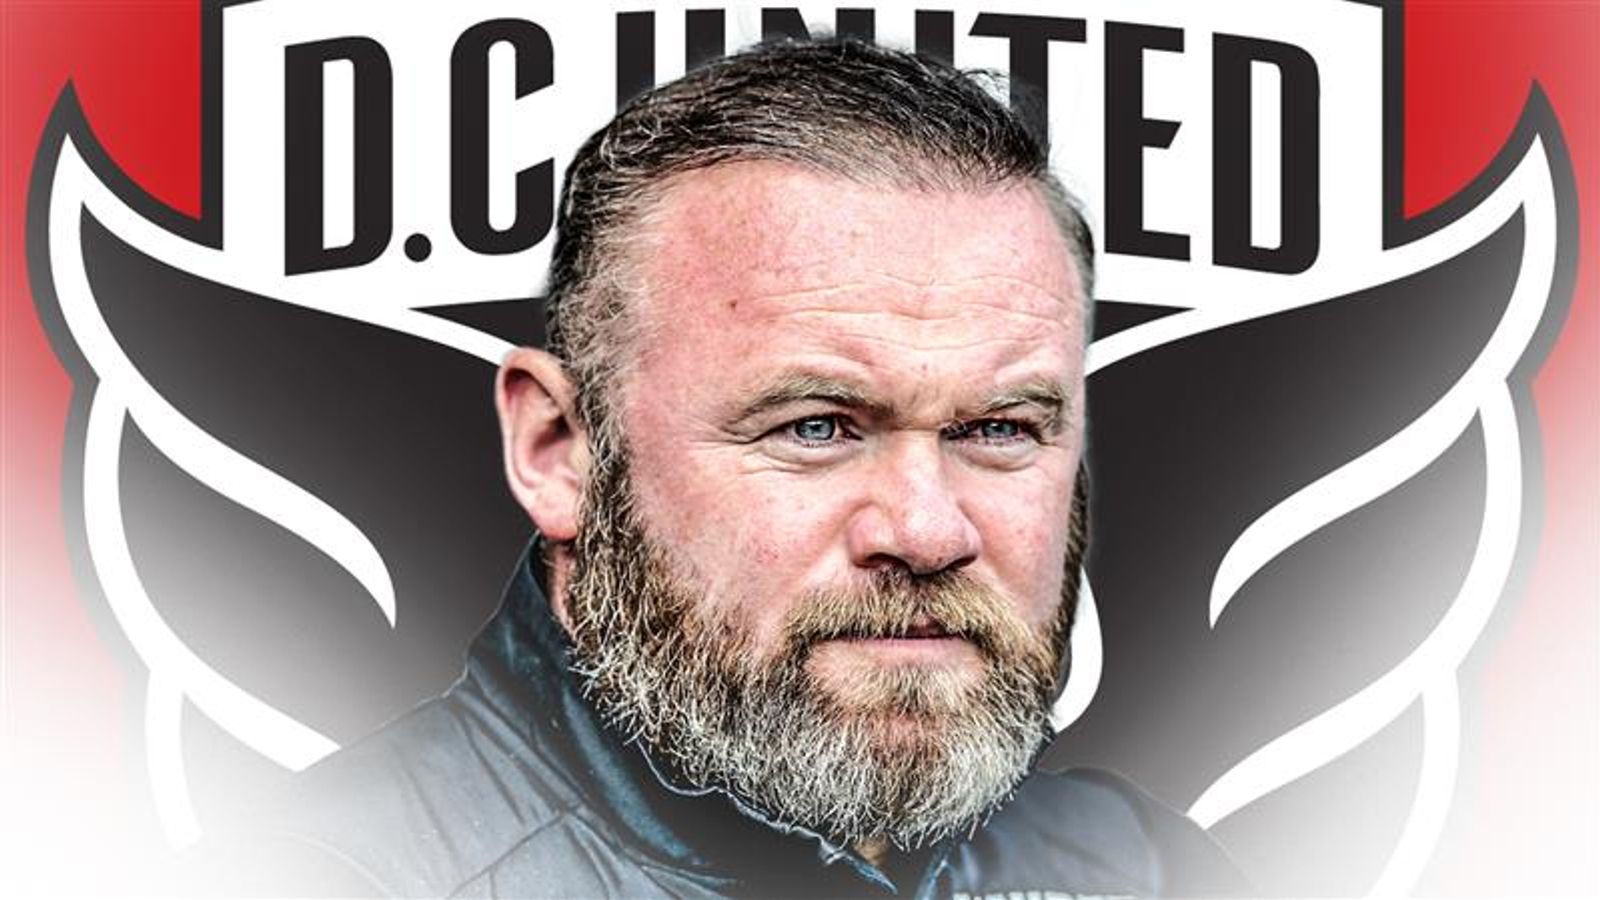 Wayne Rooney: New DC United boss is out of the frying pan and into the fire in Washington, where his acrimonious departure isn’t forgotten